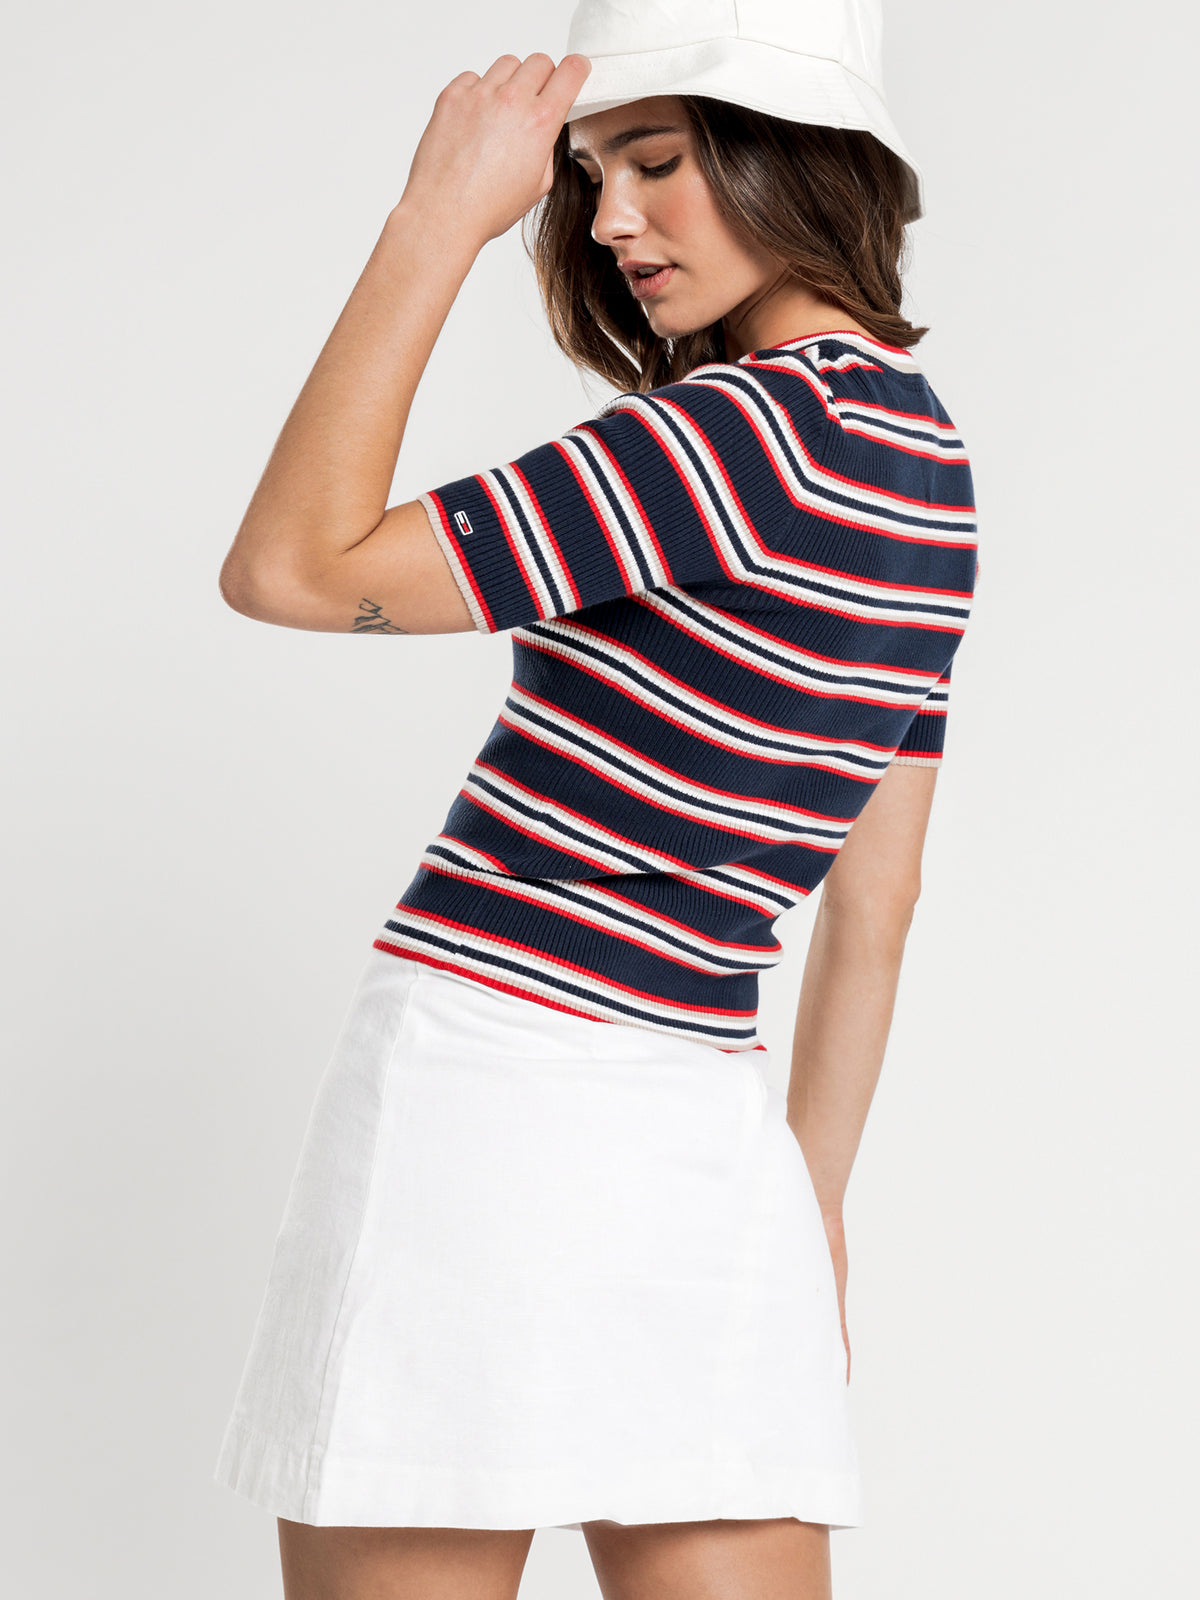 Stripe 3/4 Sleeve Sweater in Twilight Navy and Multi